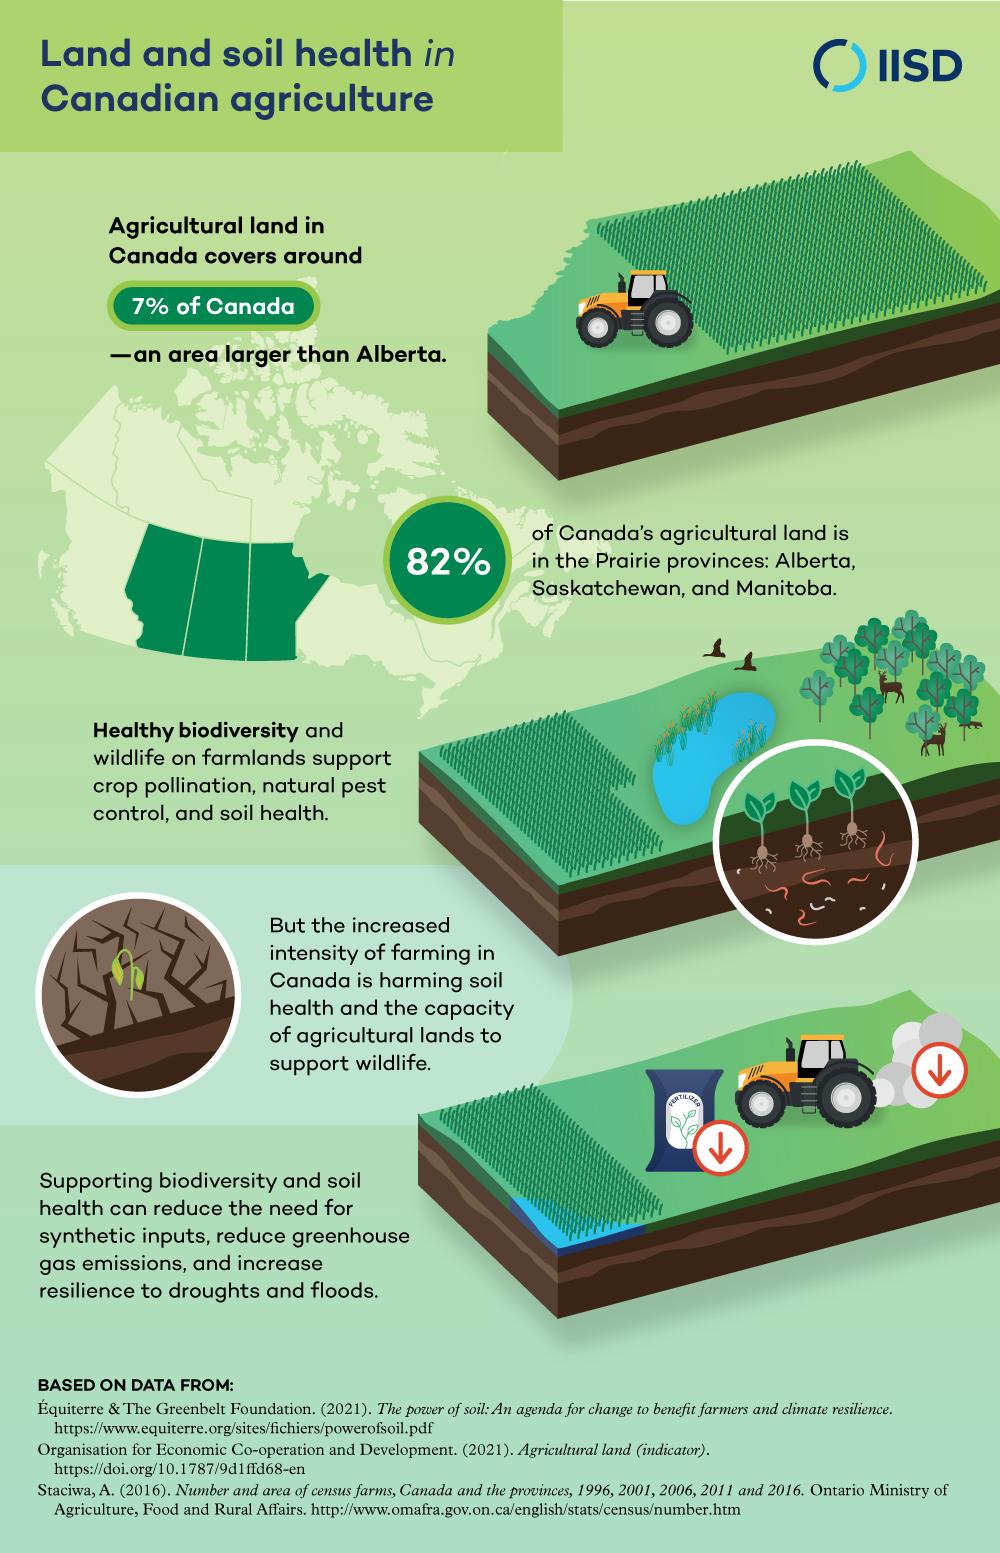 Infographic on land and soil health and Canadian agriculture